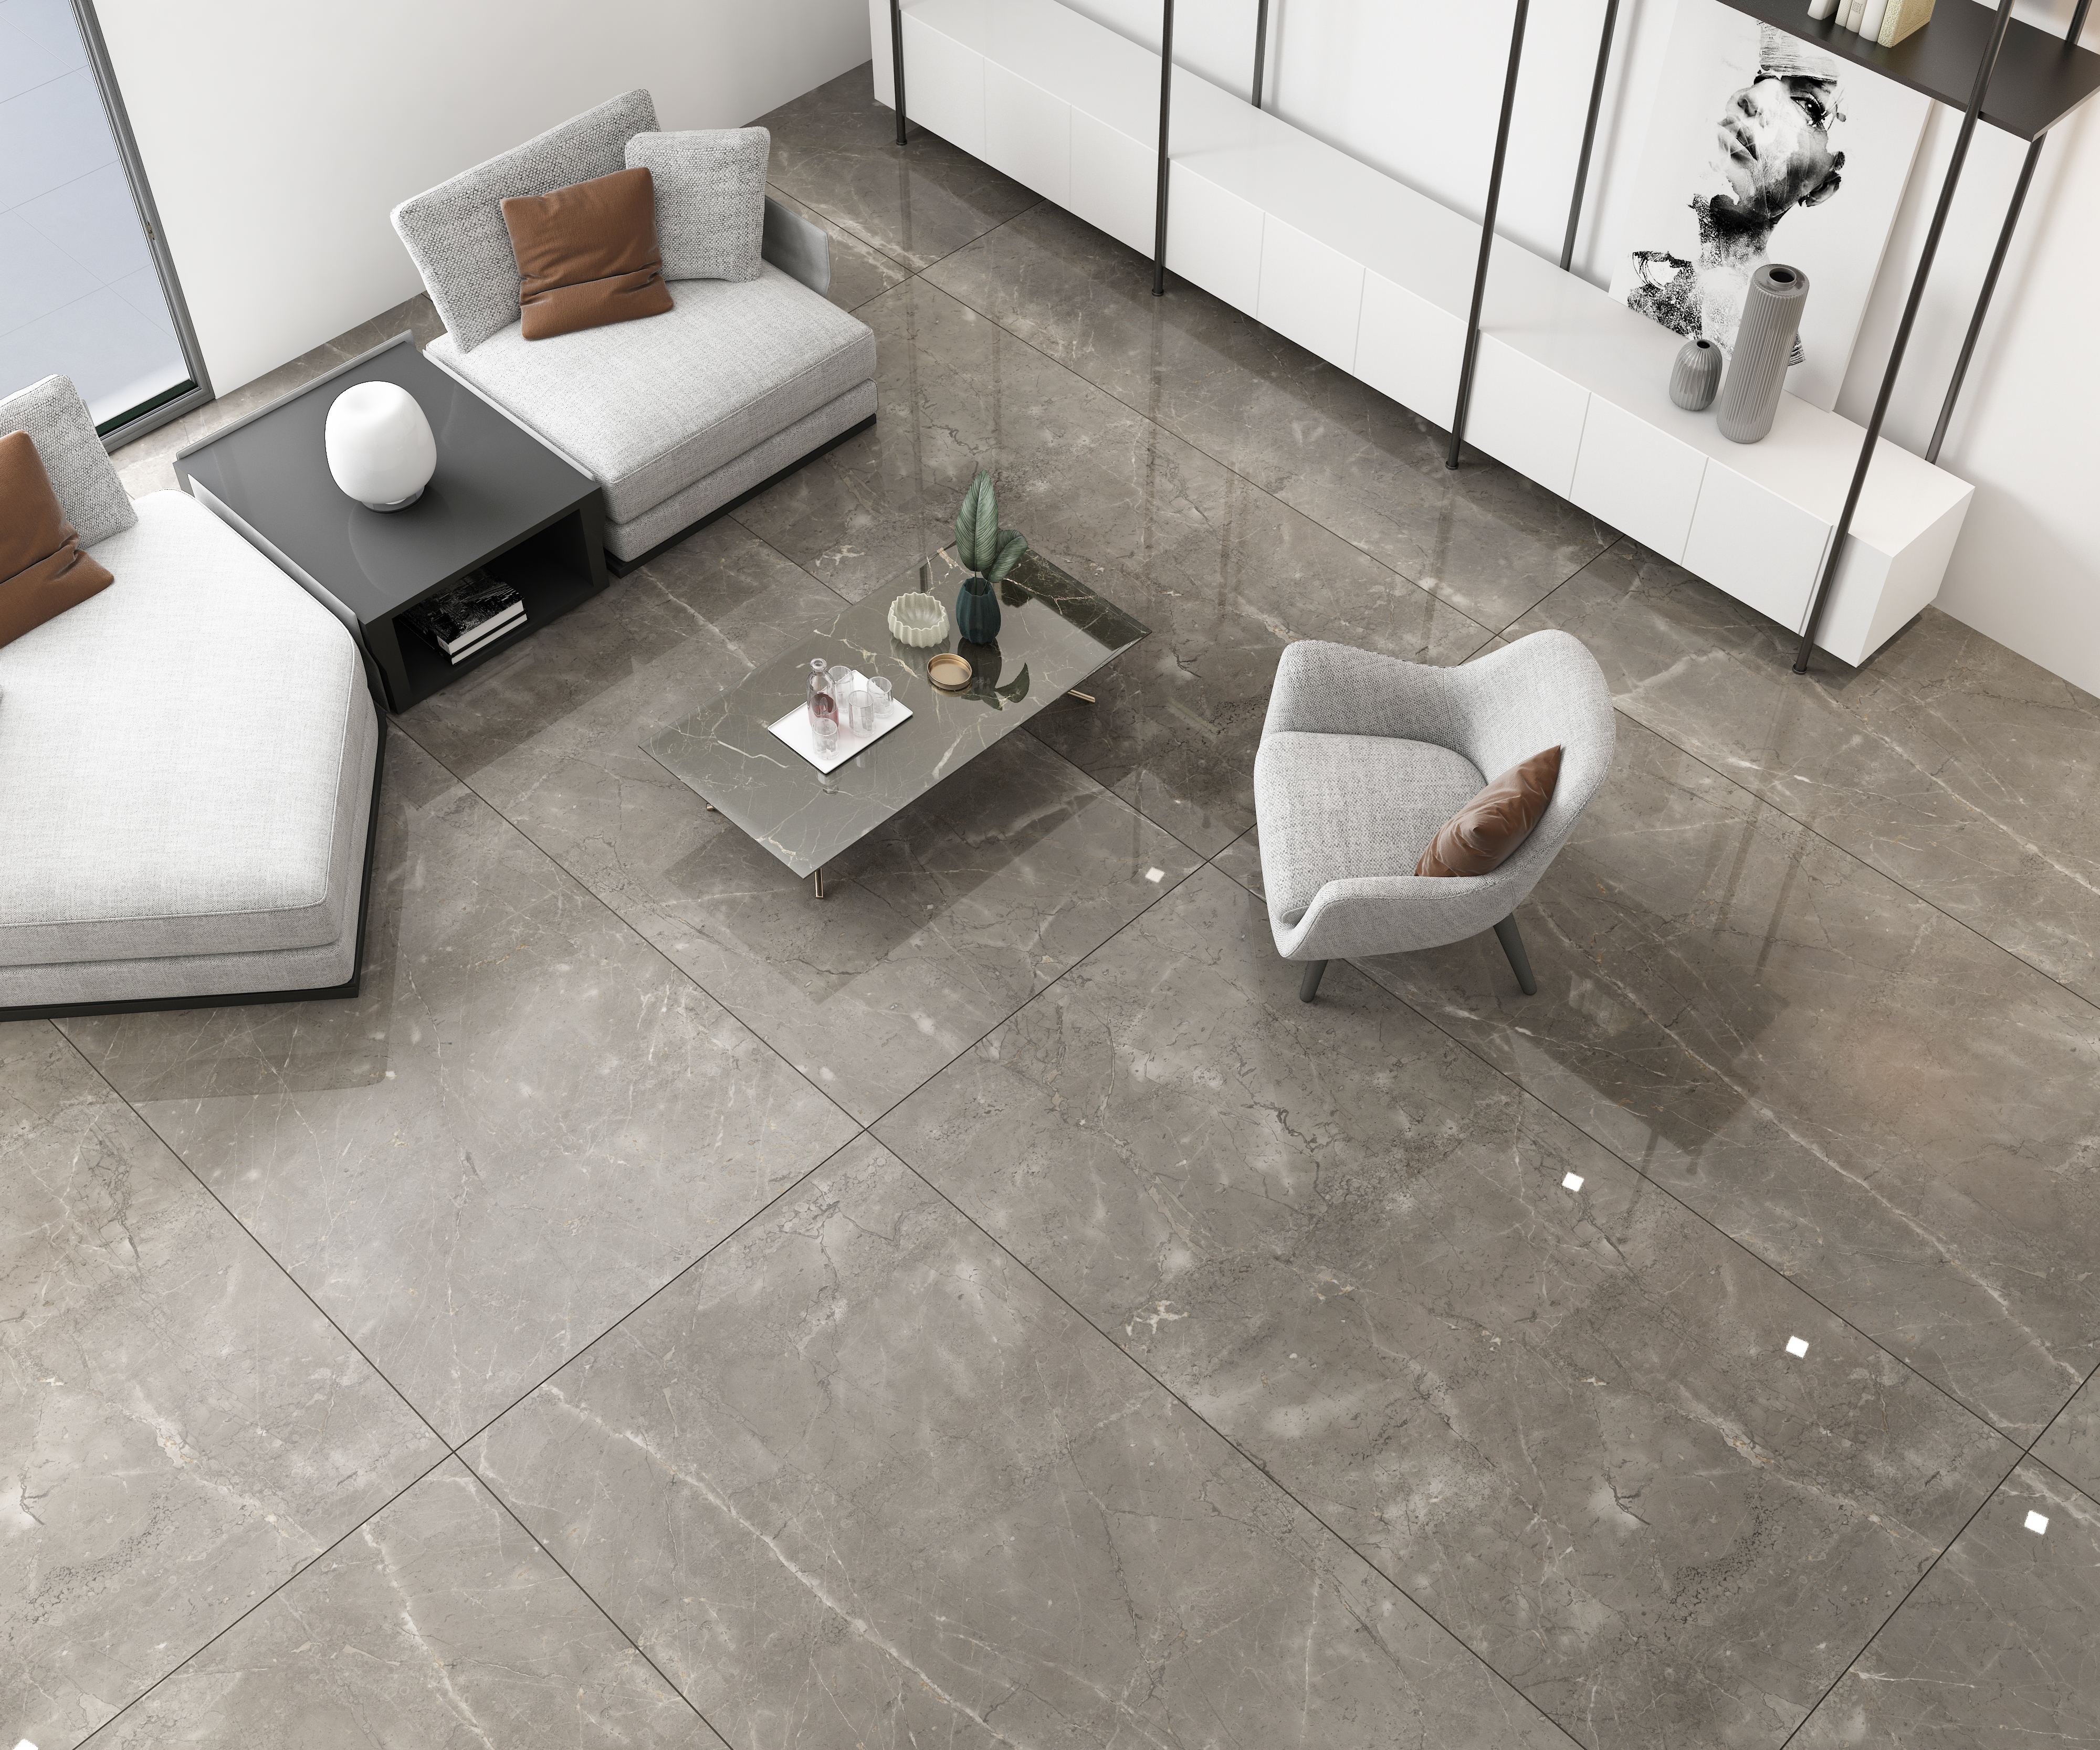 15 USEFUL TIPS TO FIND THE PERFECT TILES FOR YOUR HOME